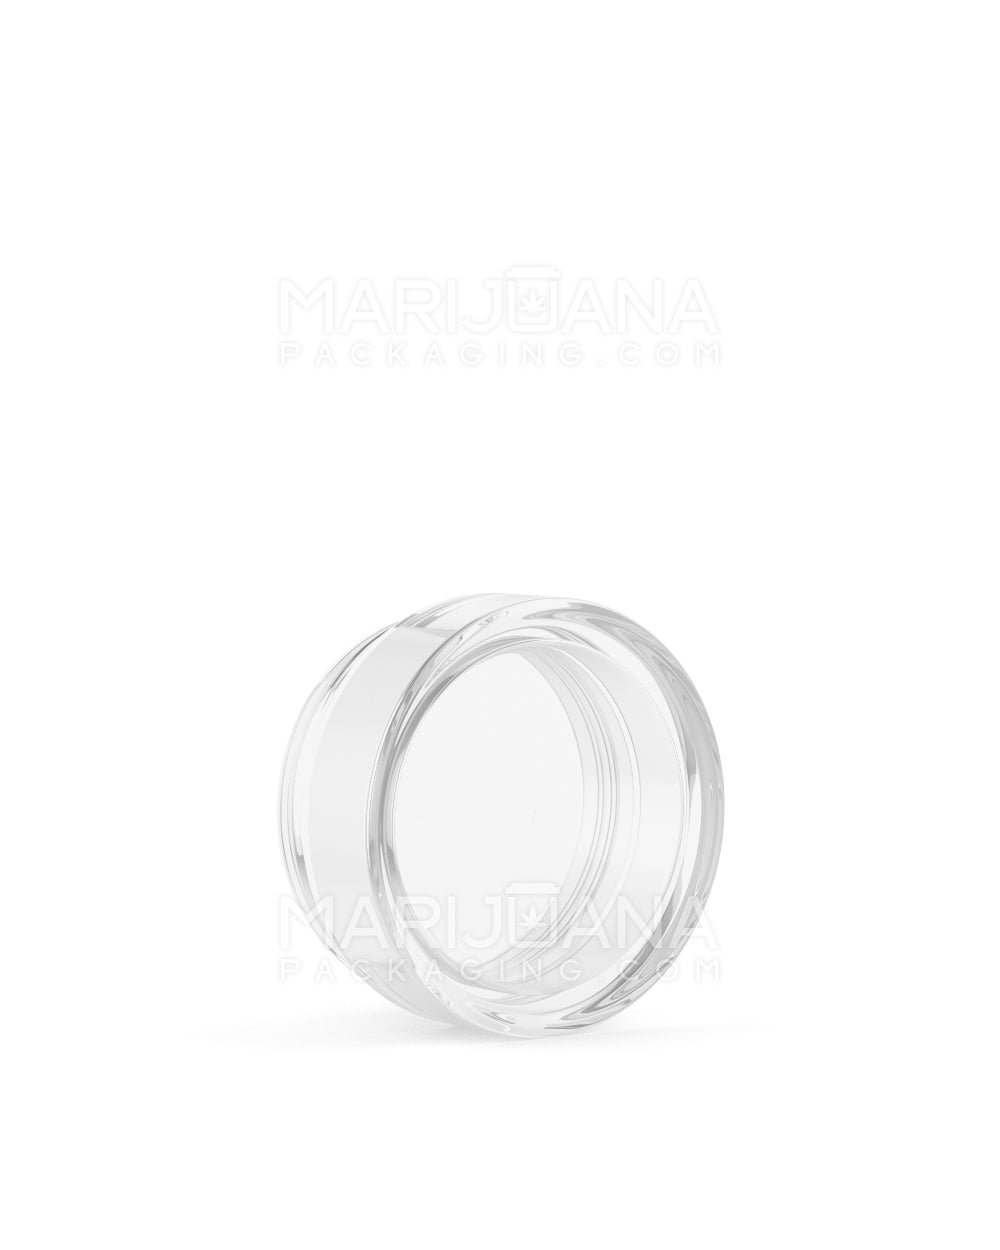 Clear Concentrate Containers w/ Screw Top Cap | 7mL - Acrylic - 200 Count - 7